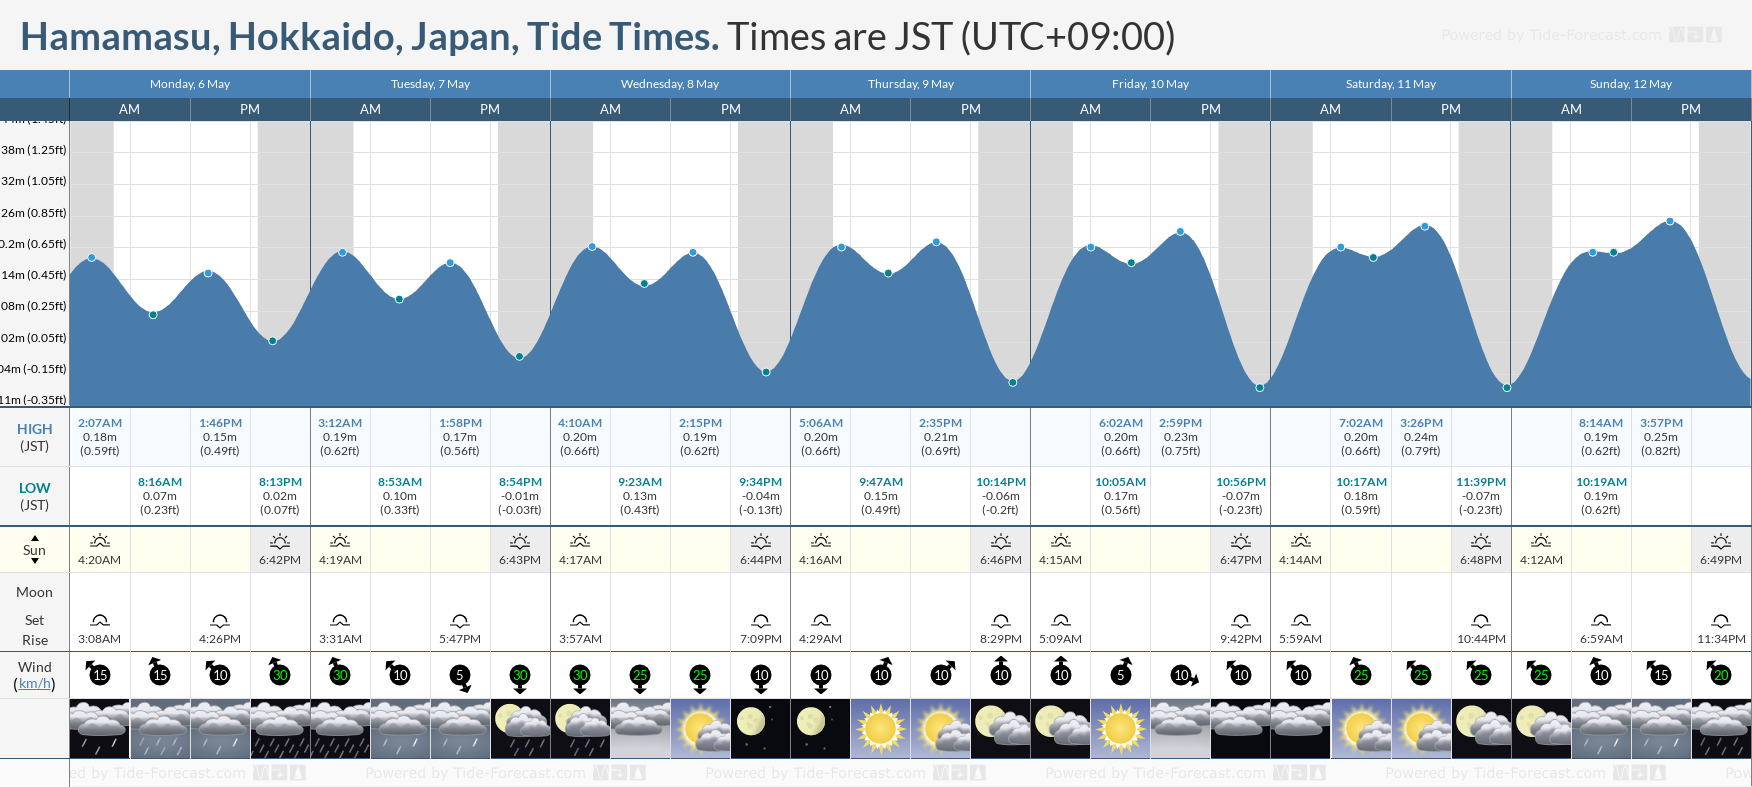 Hamamasu, Hokkaido, Japan Tide Chart including high and low tide times for the next 7 days